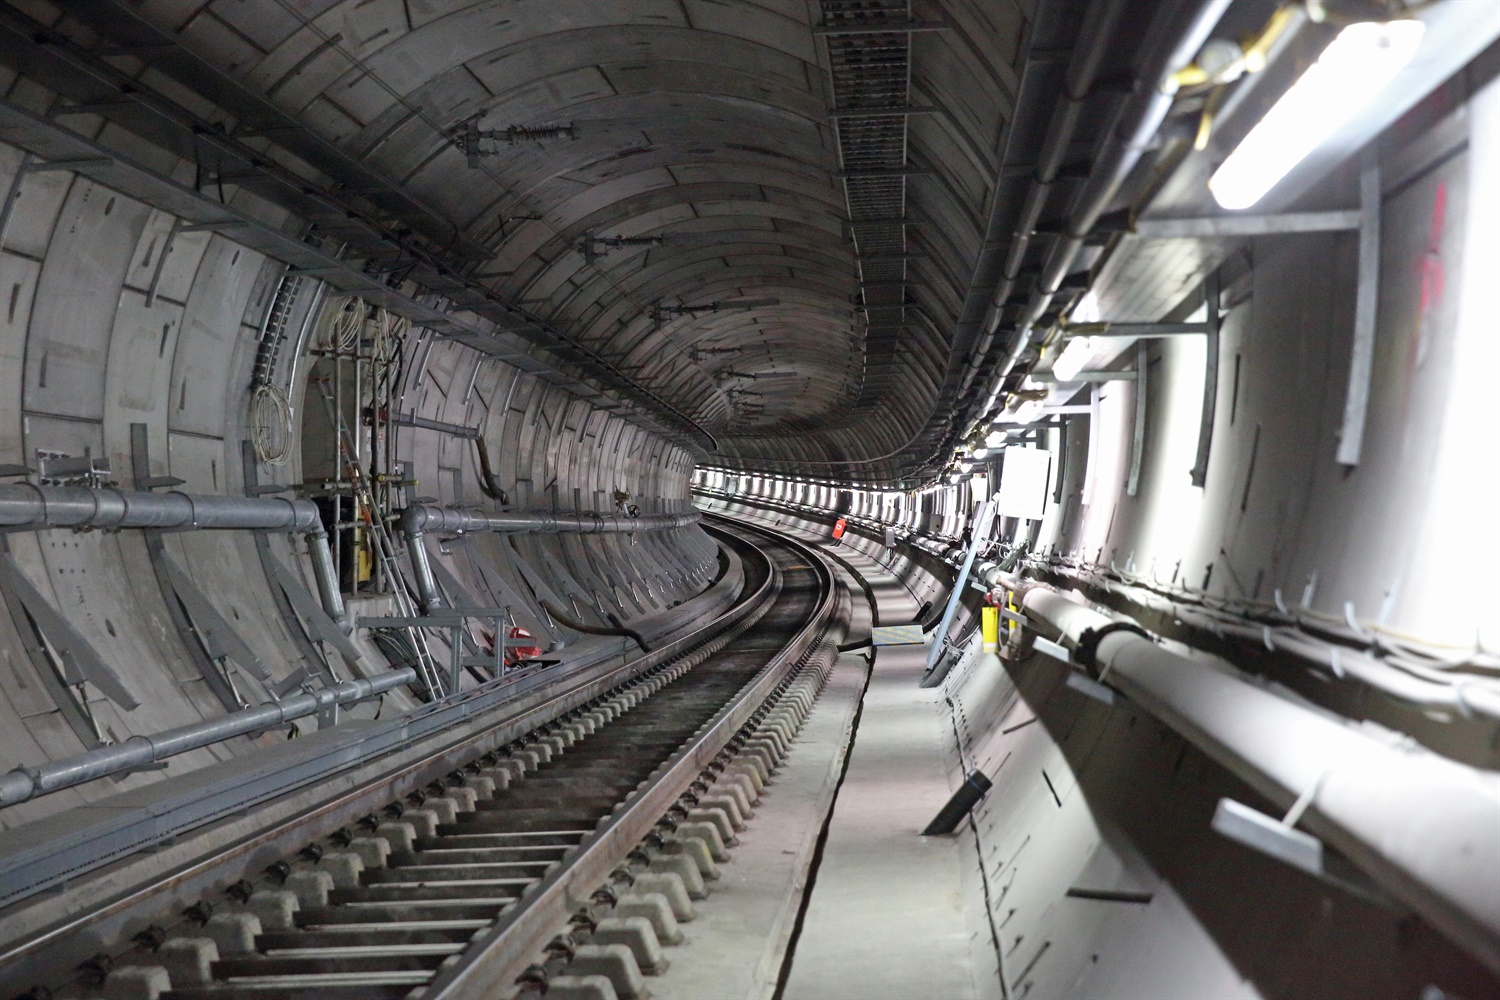 Phasing issues put Crossrail construction £190m over expected cost